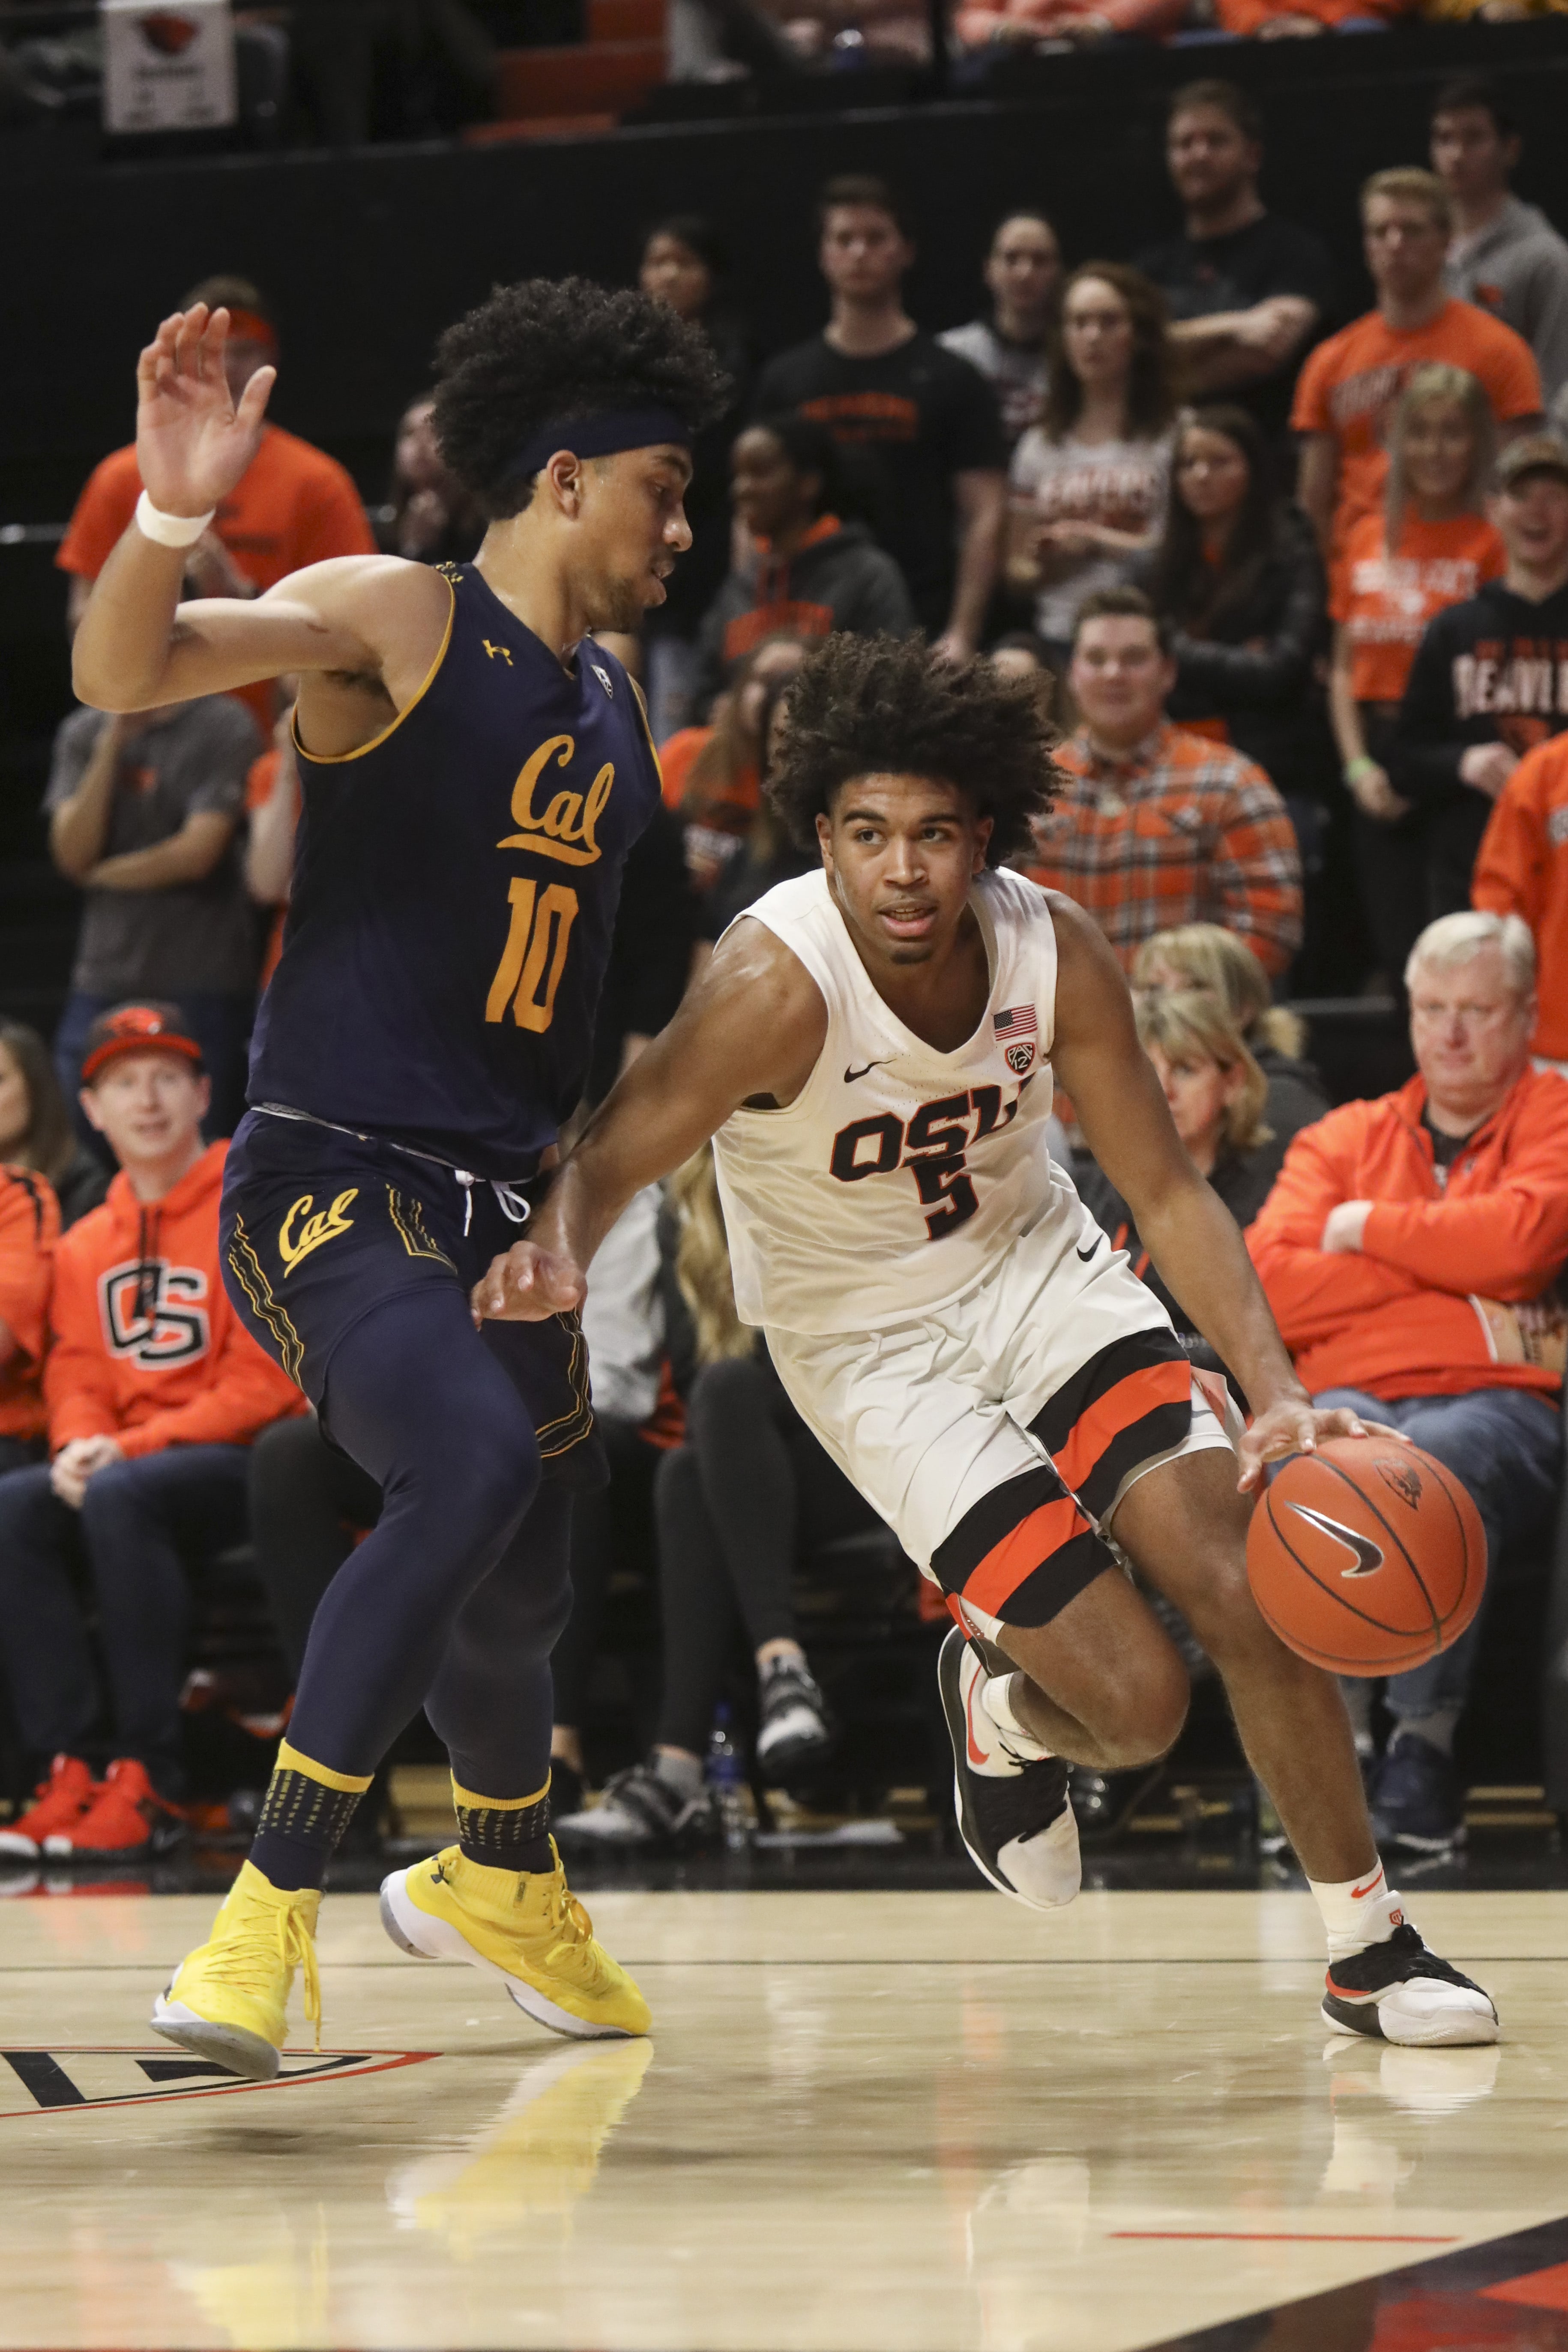 Oregon State's Ethan Thompson (5) skirts past California's Justice Sueing (10) during the second half of an NCAA college basketball game in Corvallis, Ore., Saturday, Feb. 9, 2019. Oregon State won, 79-71.